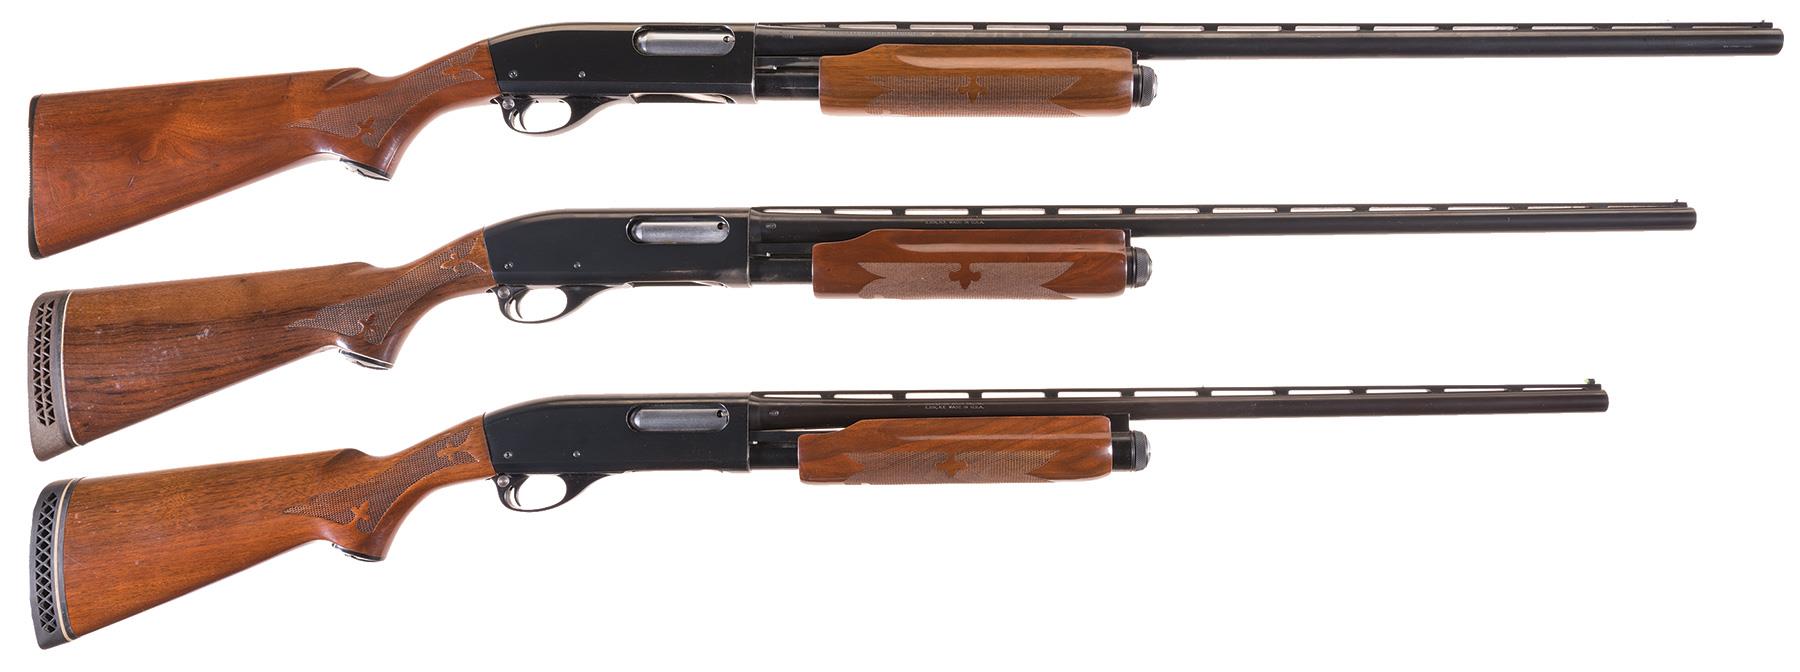 remington 870 serial numbers date of manufacture